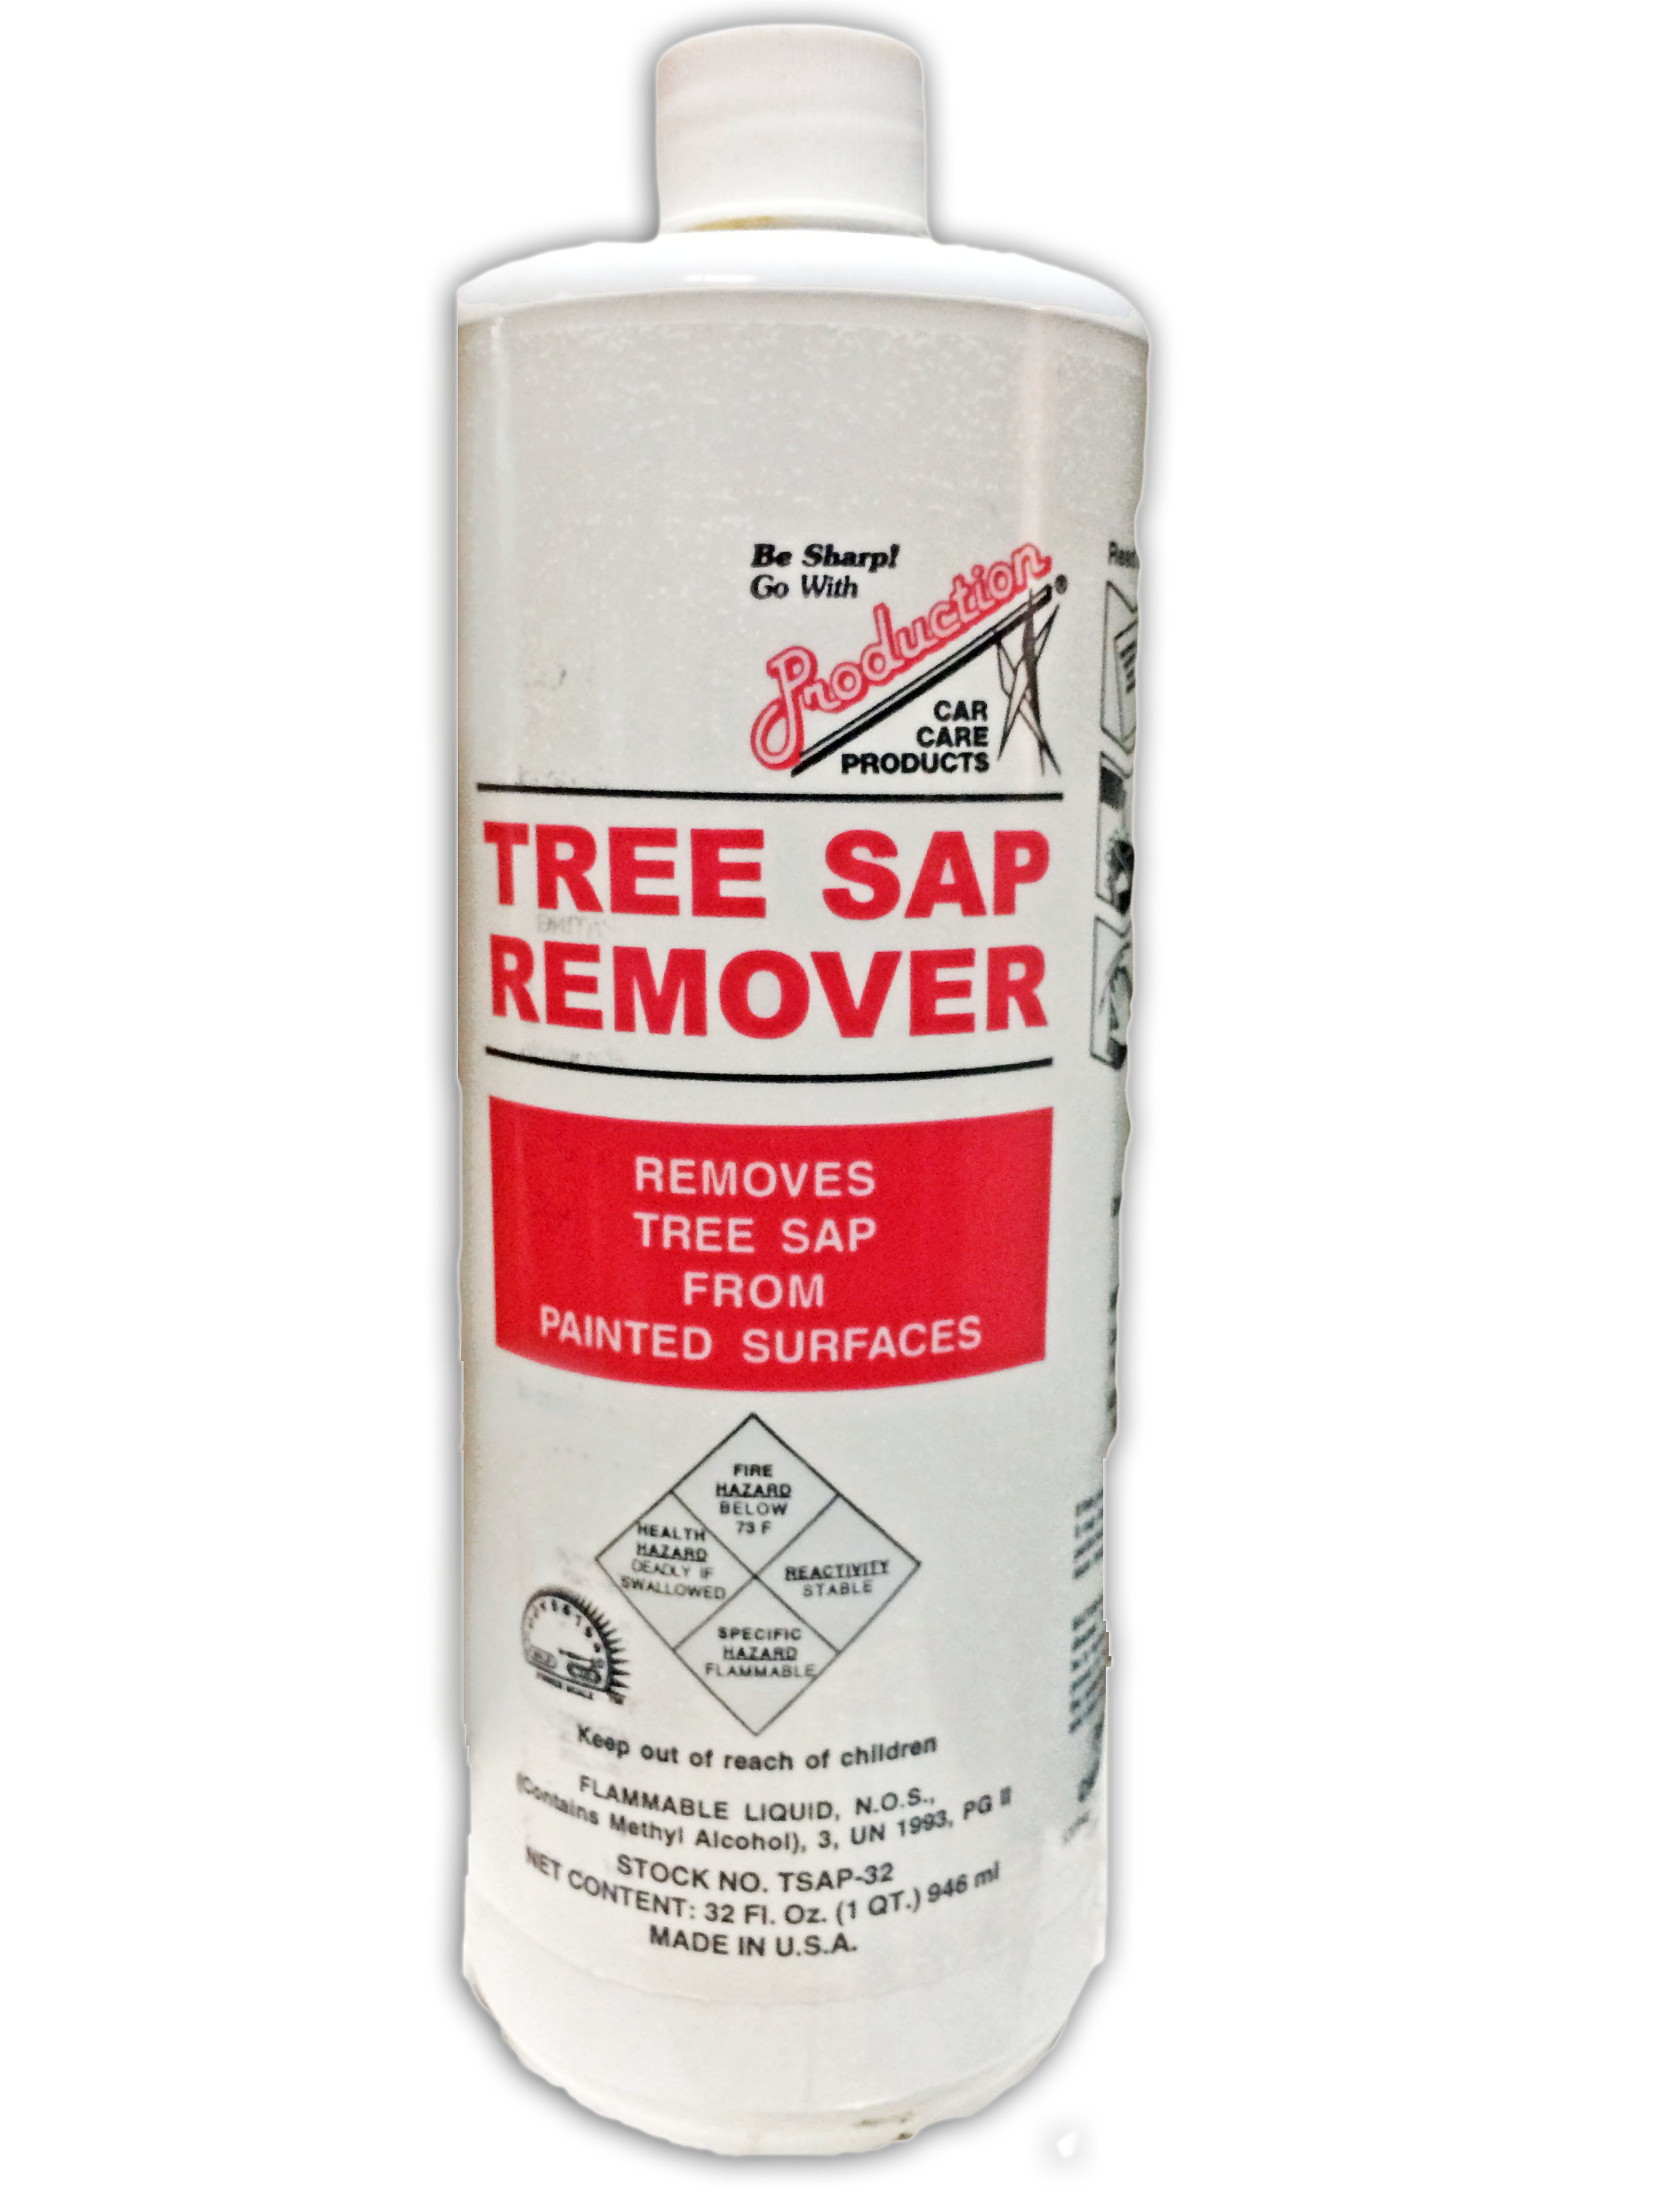 32-OZ. TREE SAP REMOVER - WORLD'S FINEST CAR CARE PRODUCTS